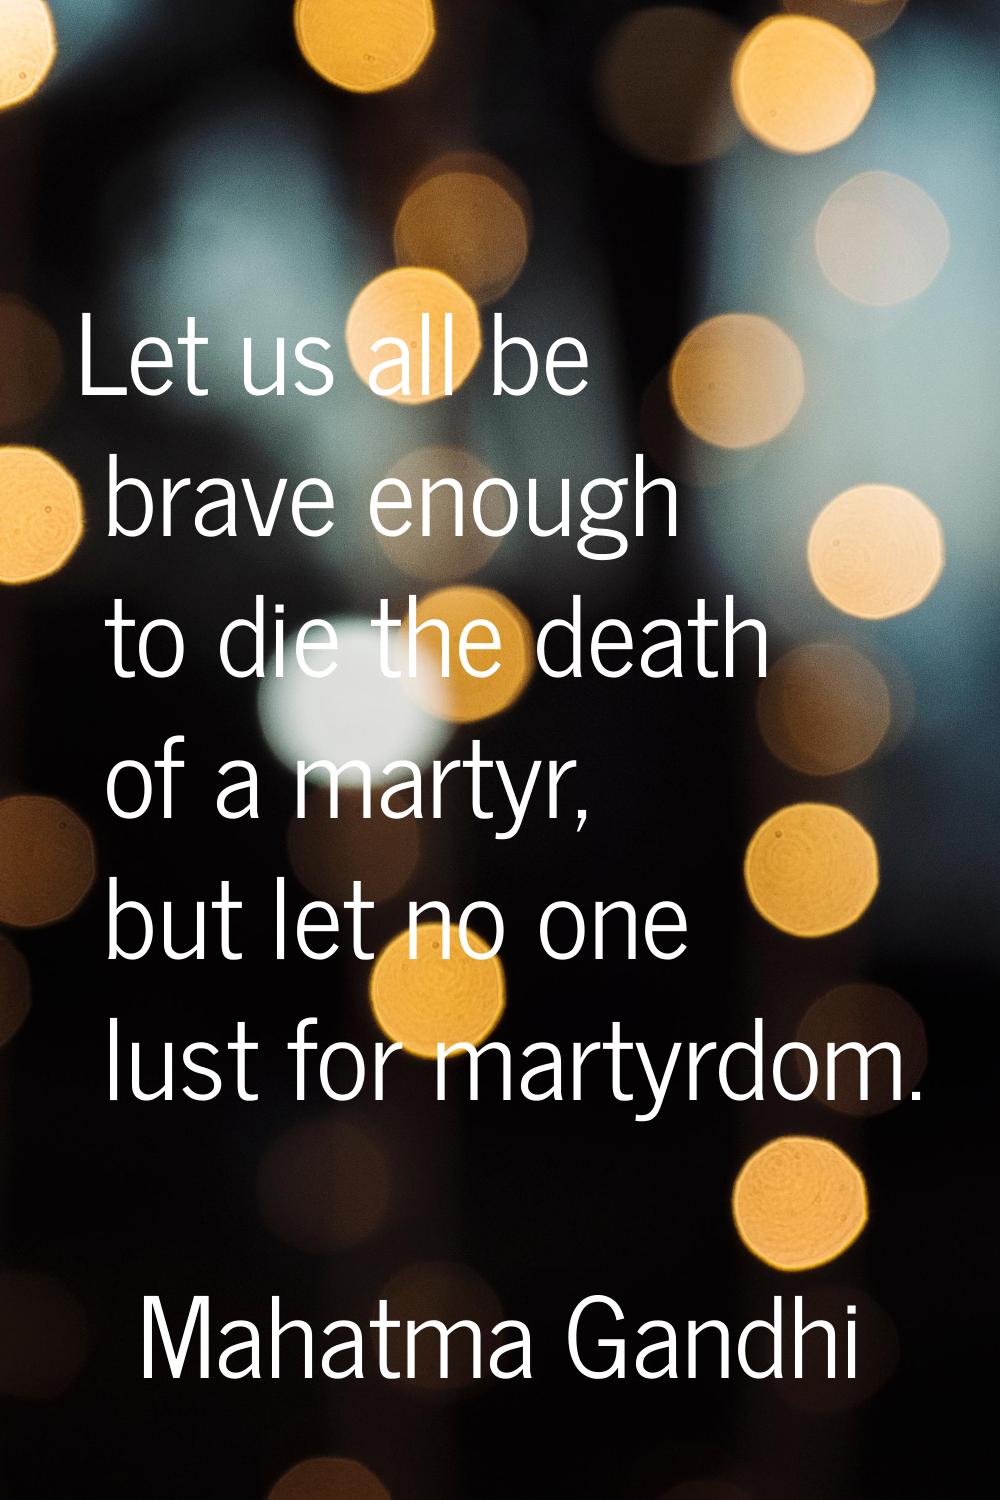 Let us all be brave enough to die the death of a martyr, but let no one lust for martyrdom.